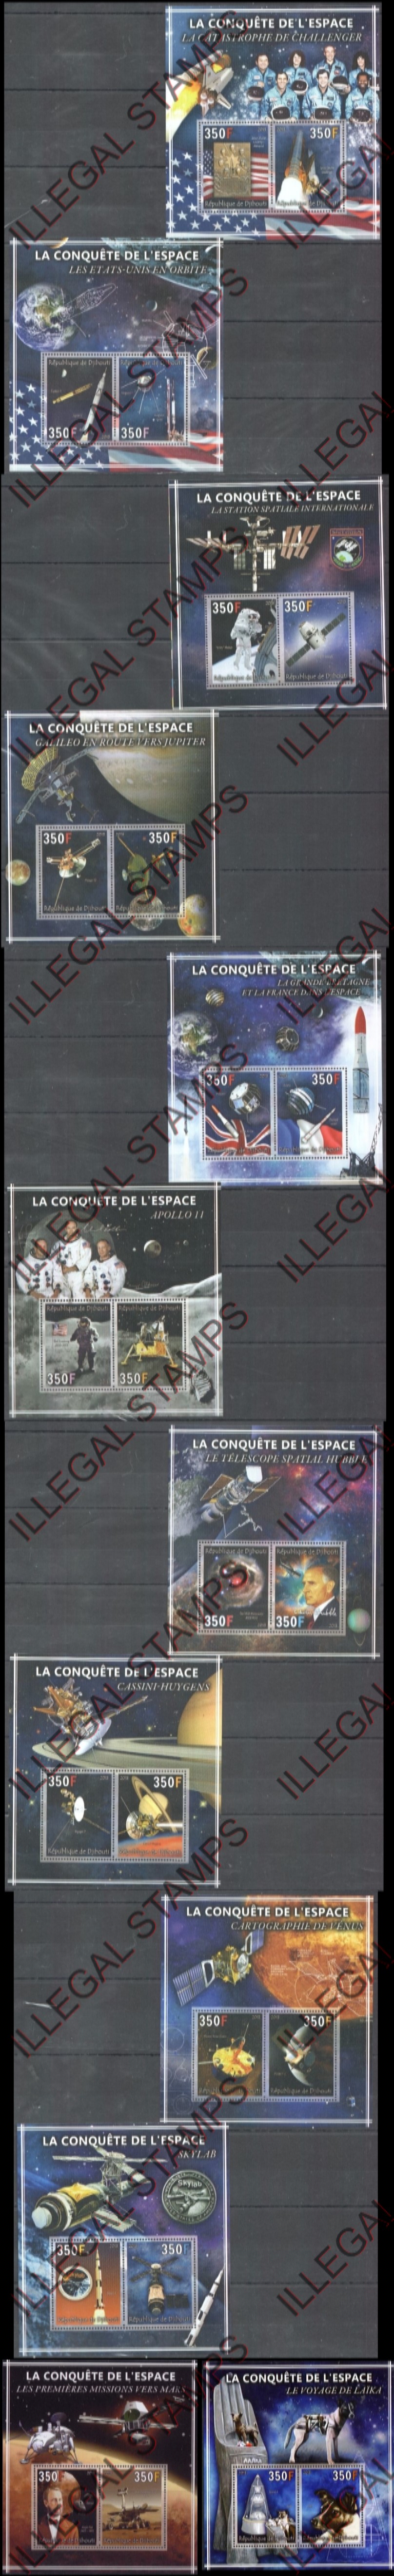 Djibouti 2013 Space Conquest Illegal Stamp Souvenir Sheets of 2